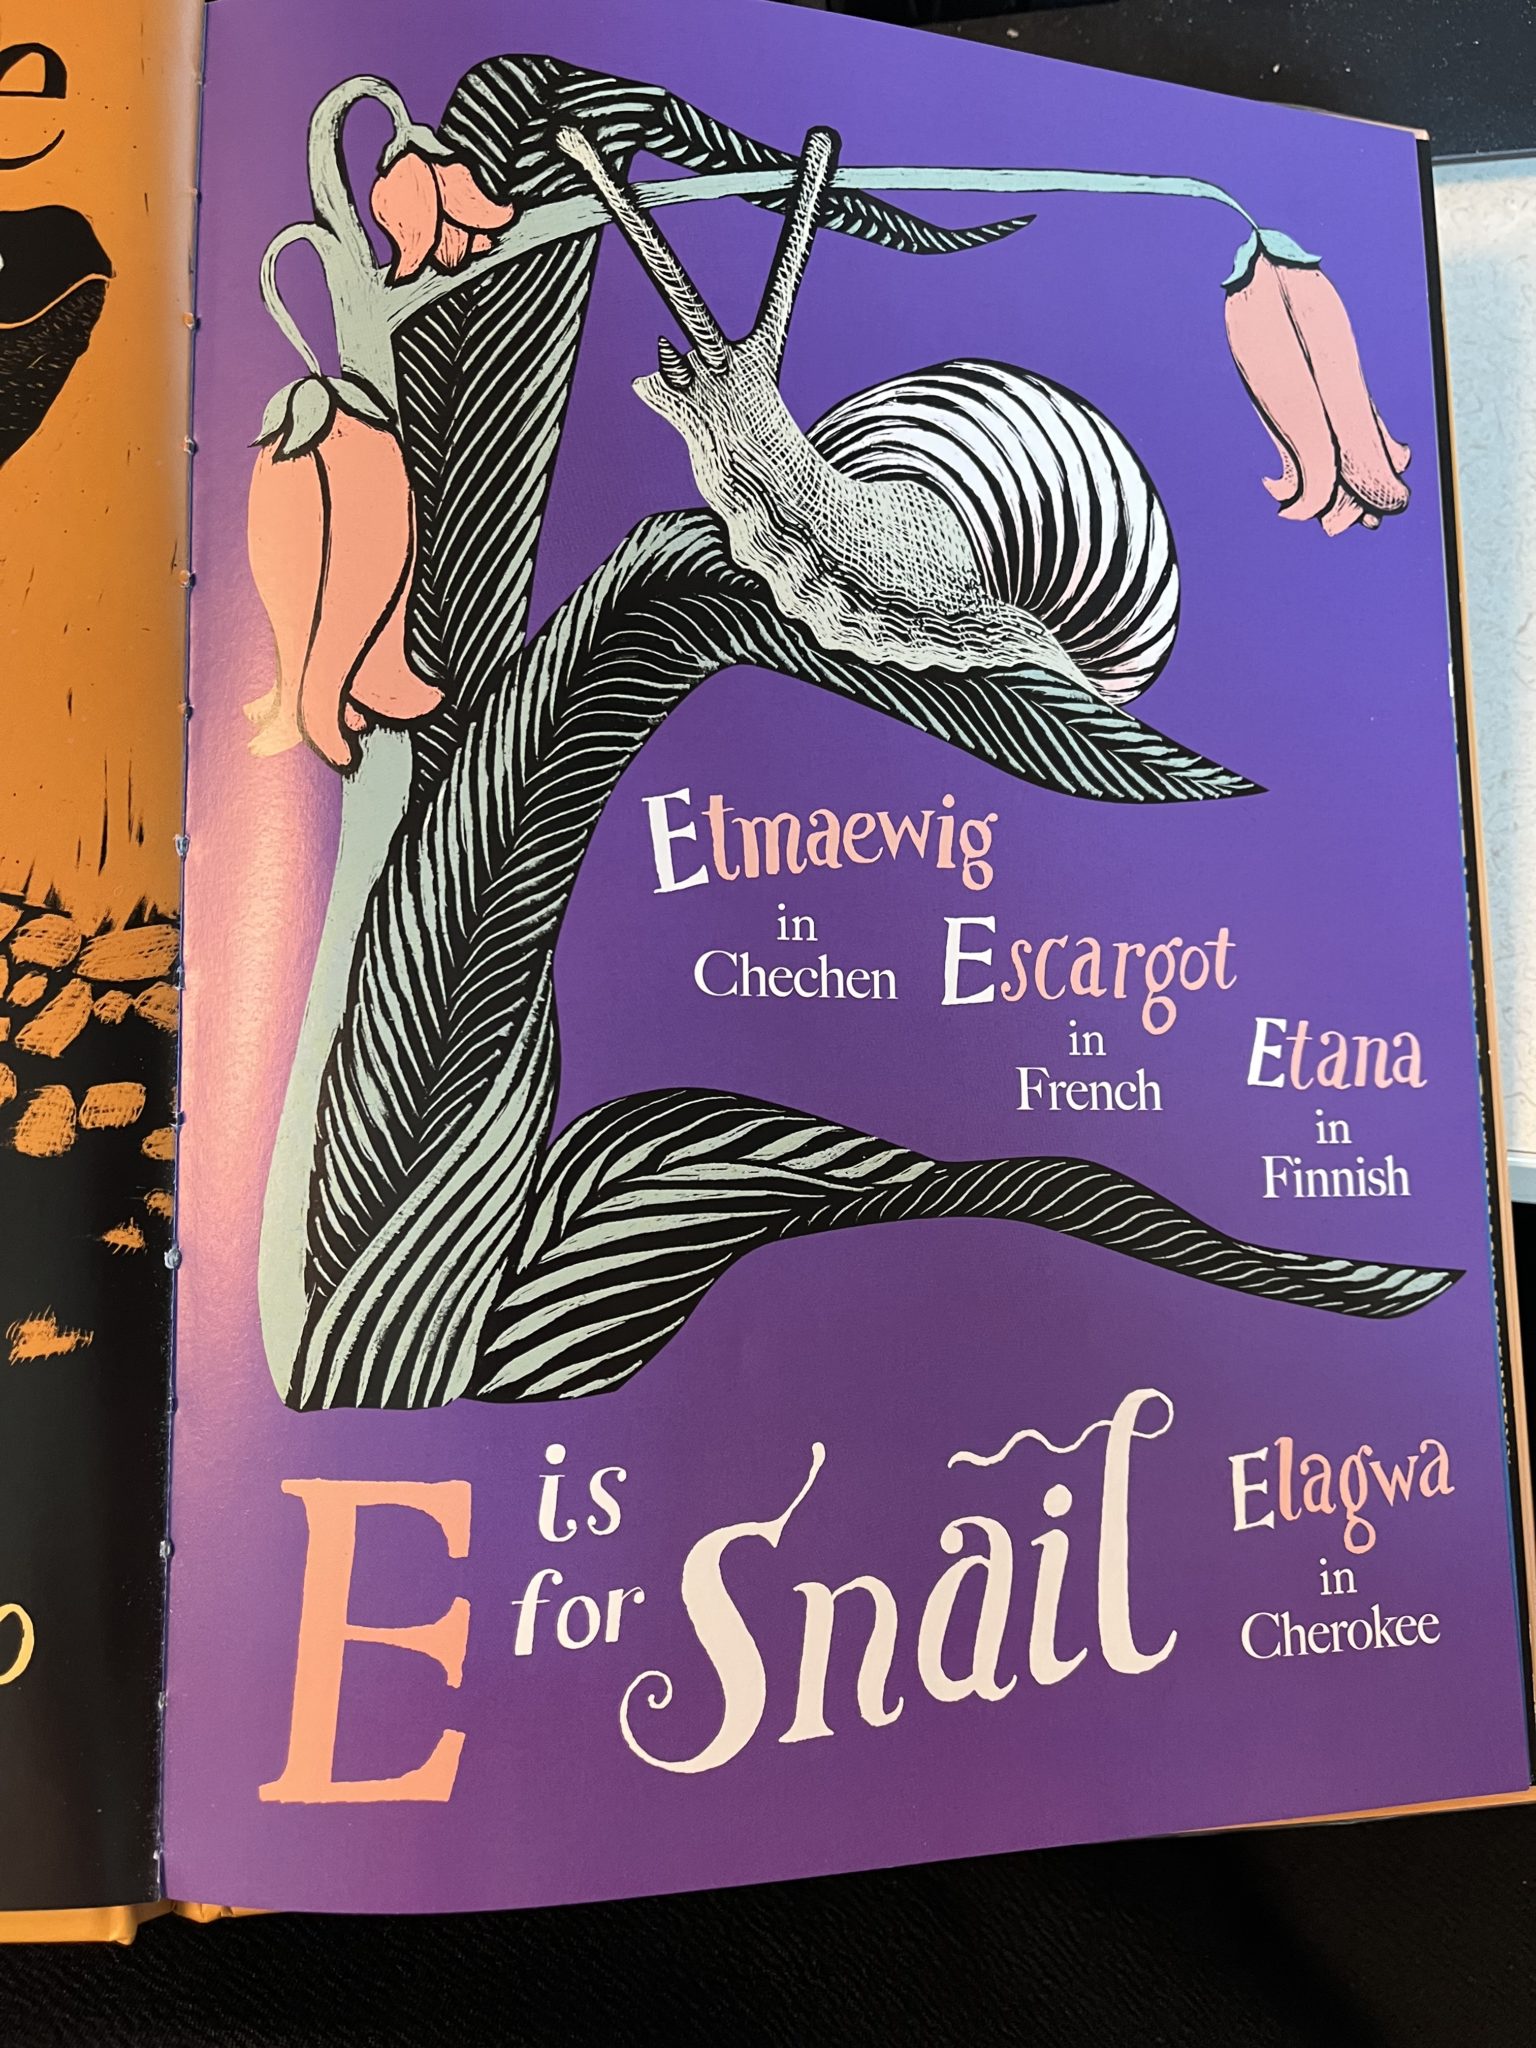 Black and white drawing of a snail on a flower with the words "E is for Snail, Etmaewig in Chechen, Escargot in French, Etana in Finnish, Elagwa in Cherokee"